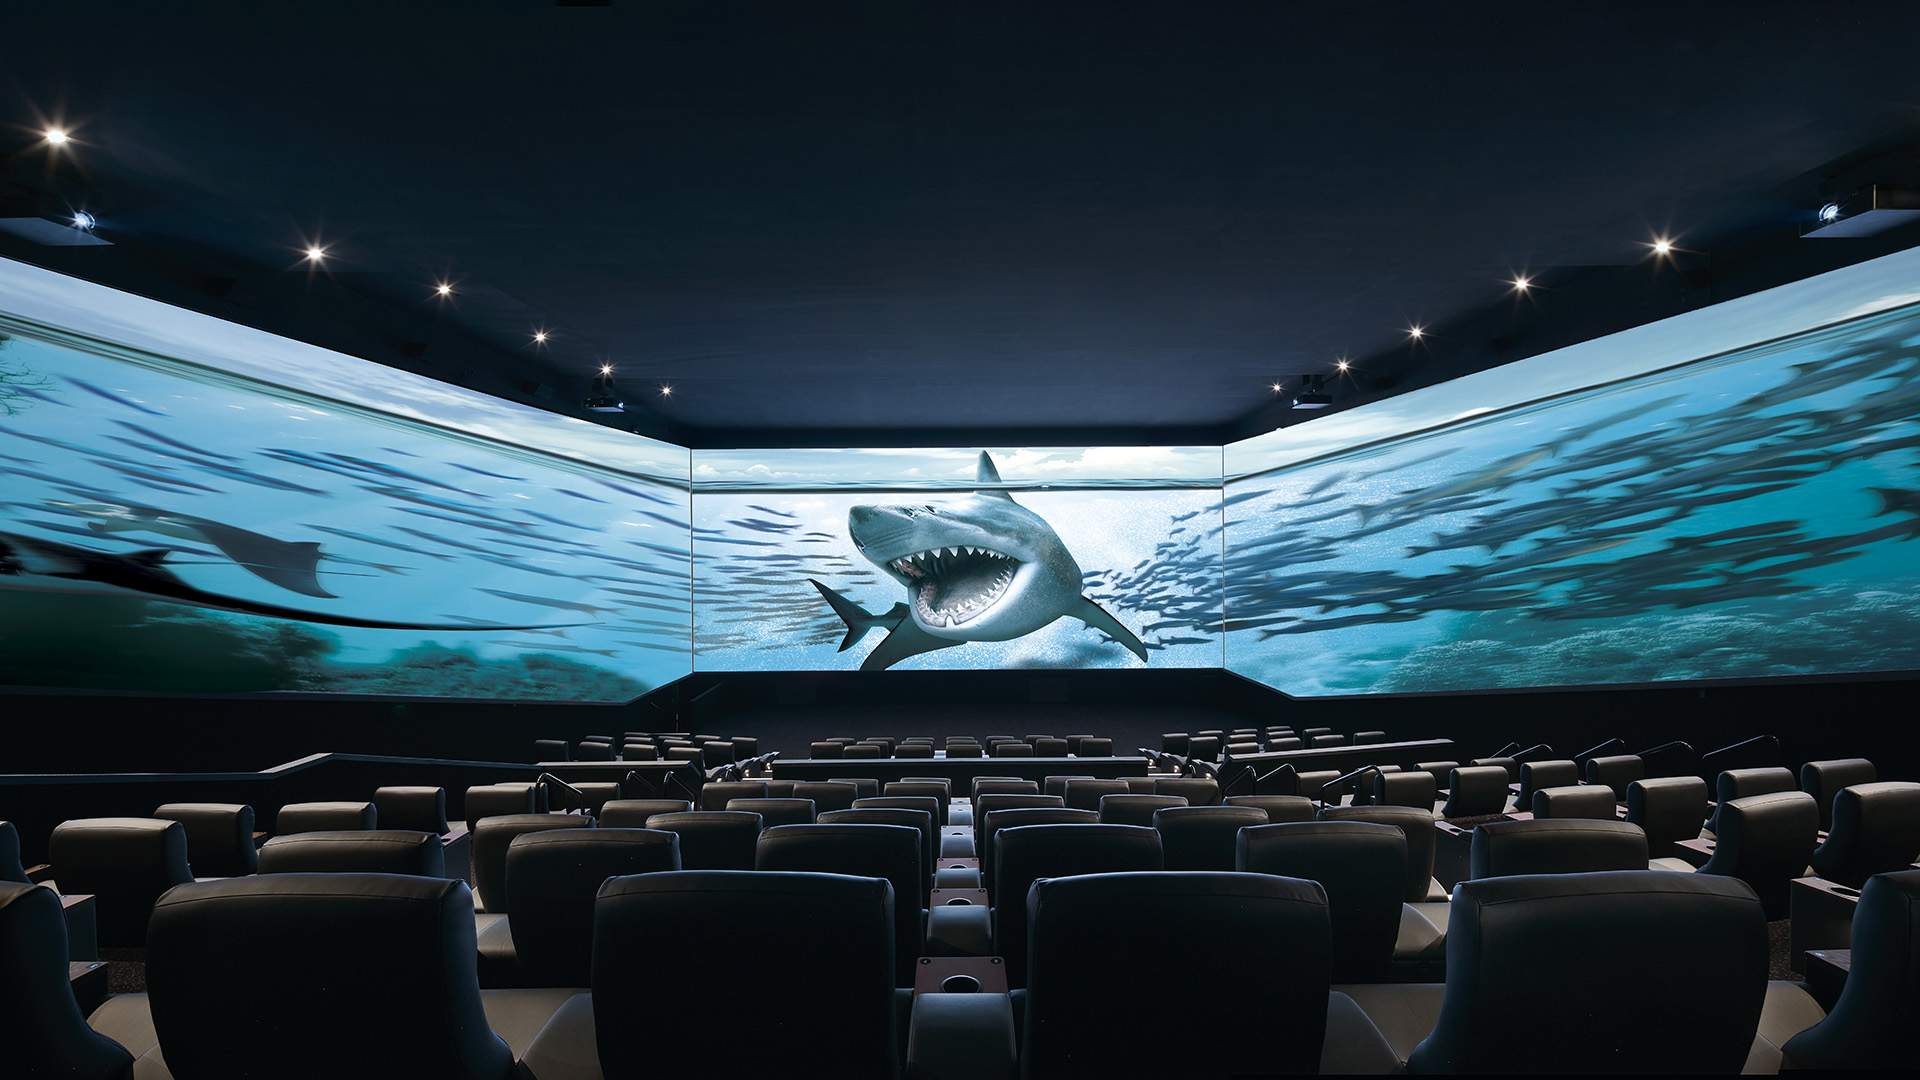 Surround-Screen Viewing Is Coming to Australia: Event Cinemas' New ScreenX Projects Movies Over Three Walls